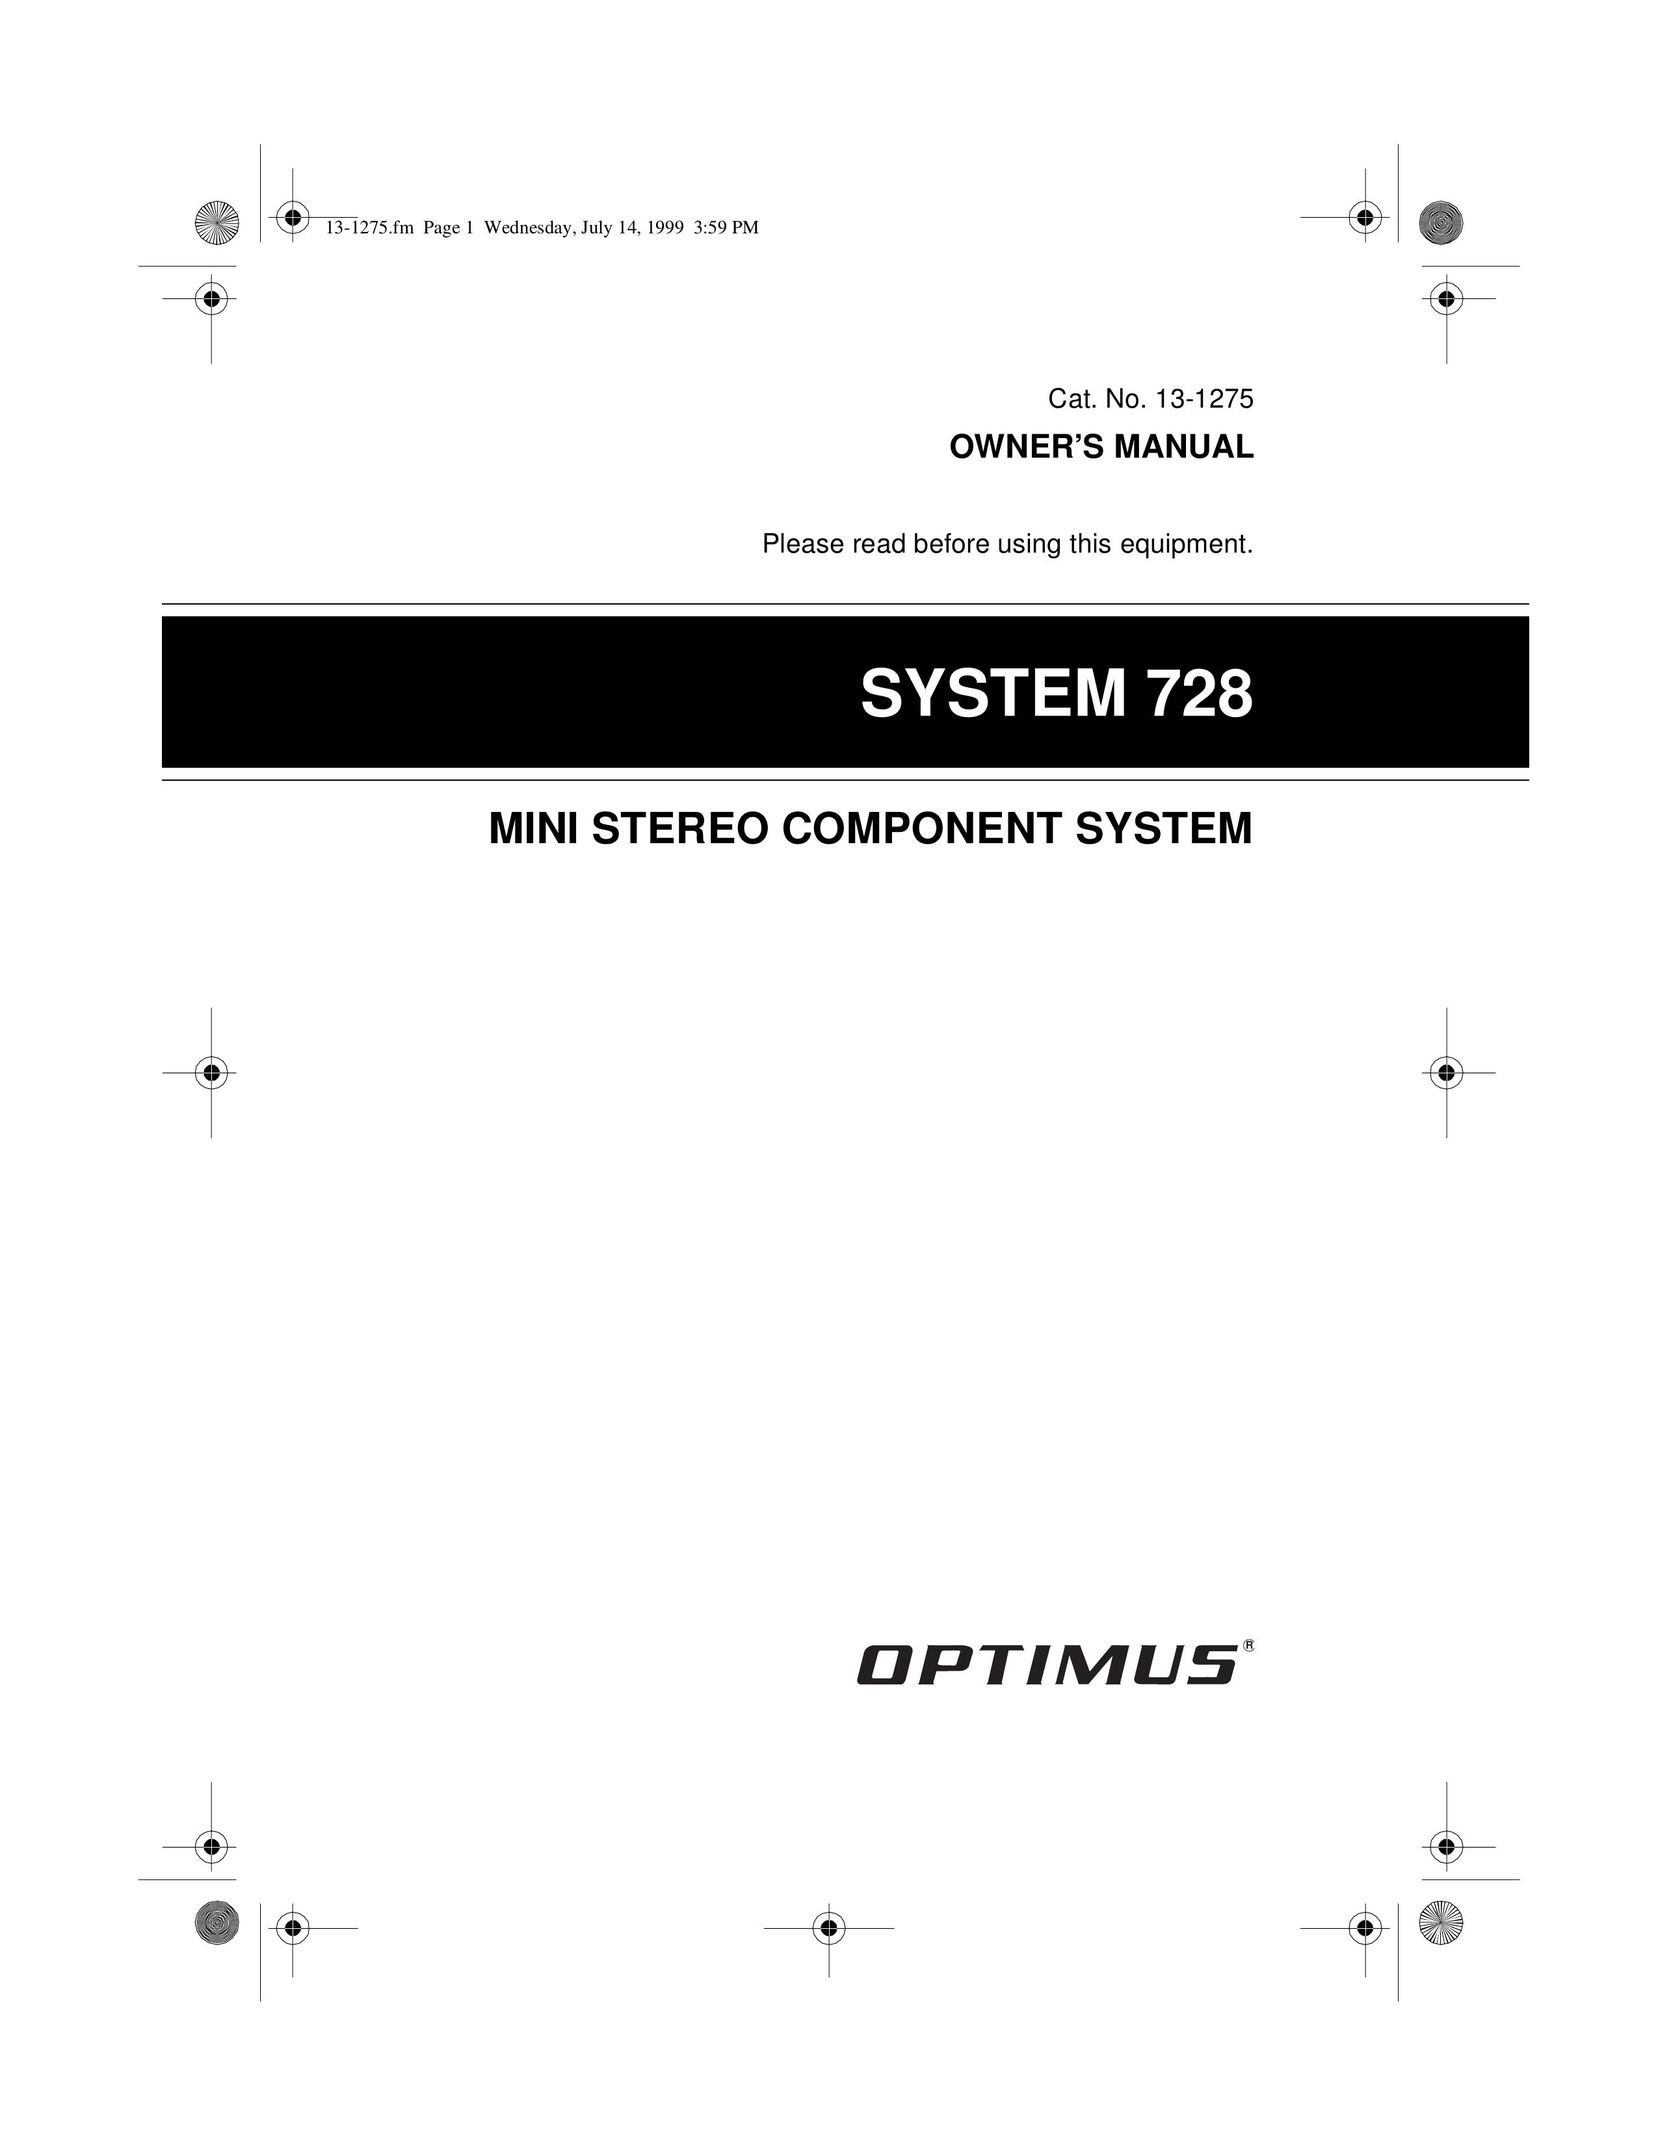 Optimus SYSTEM 728 Home Theater System User Manual